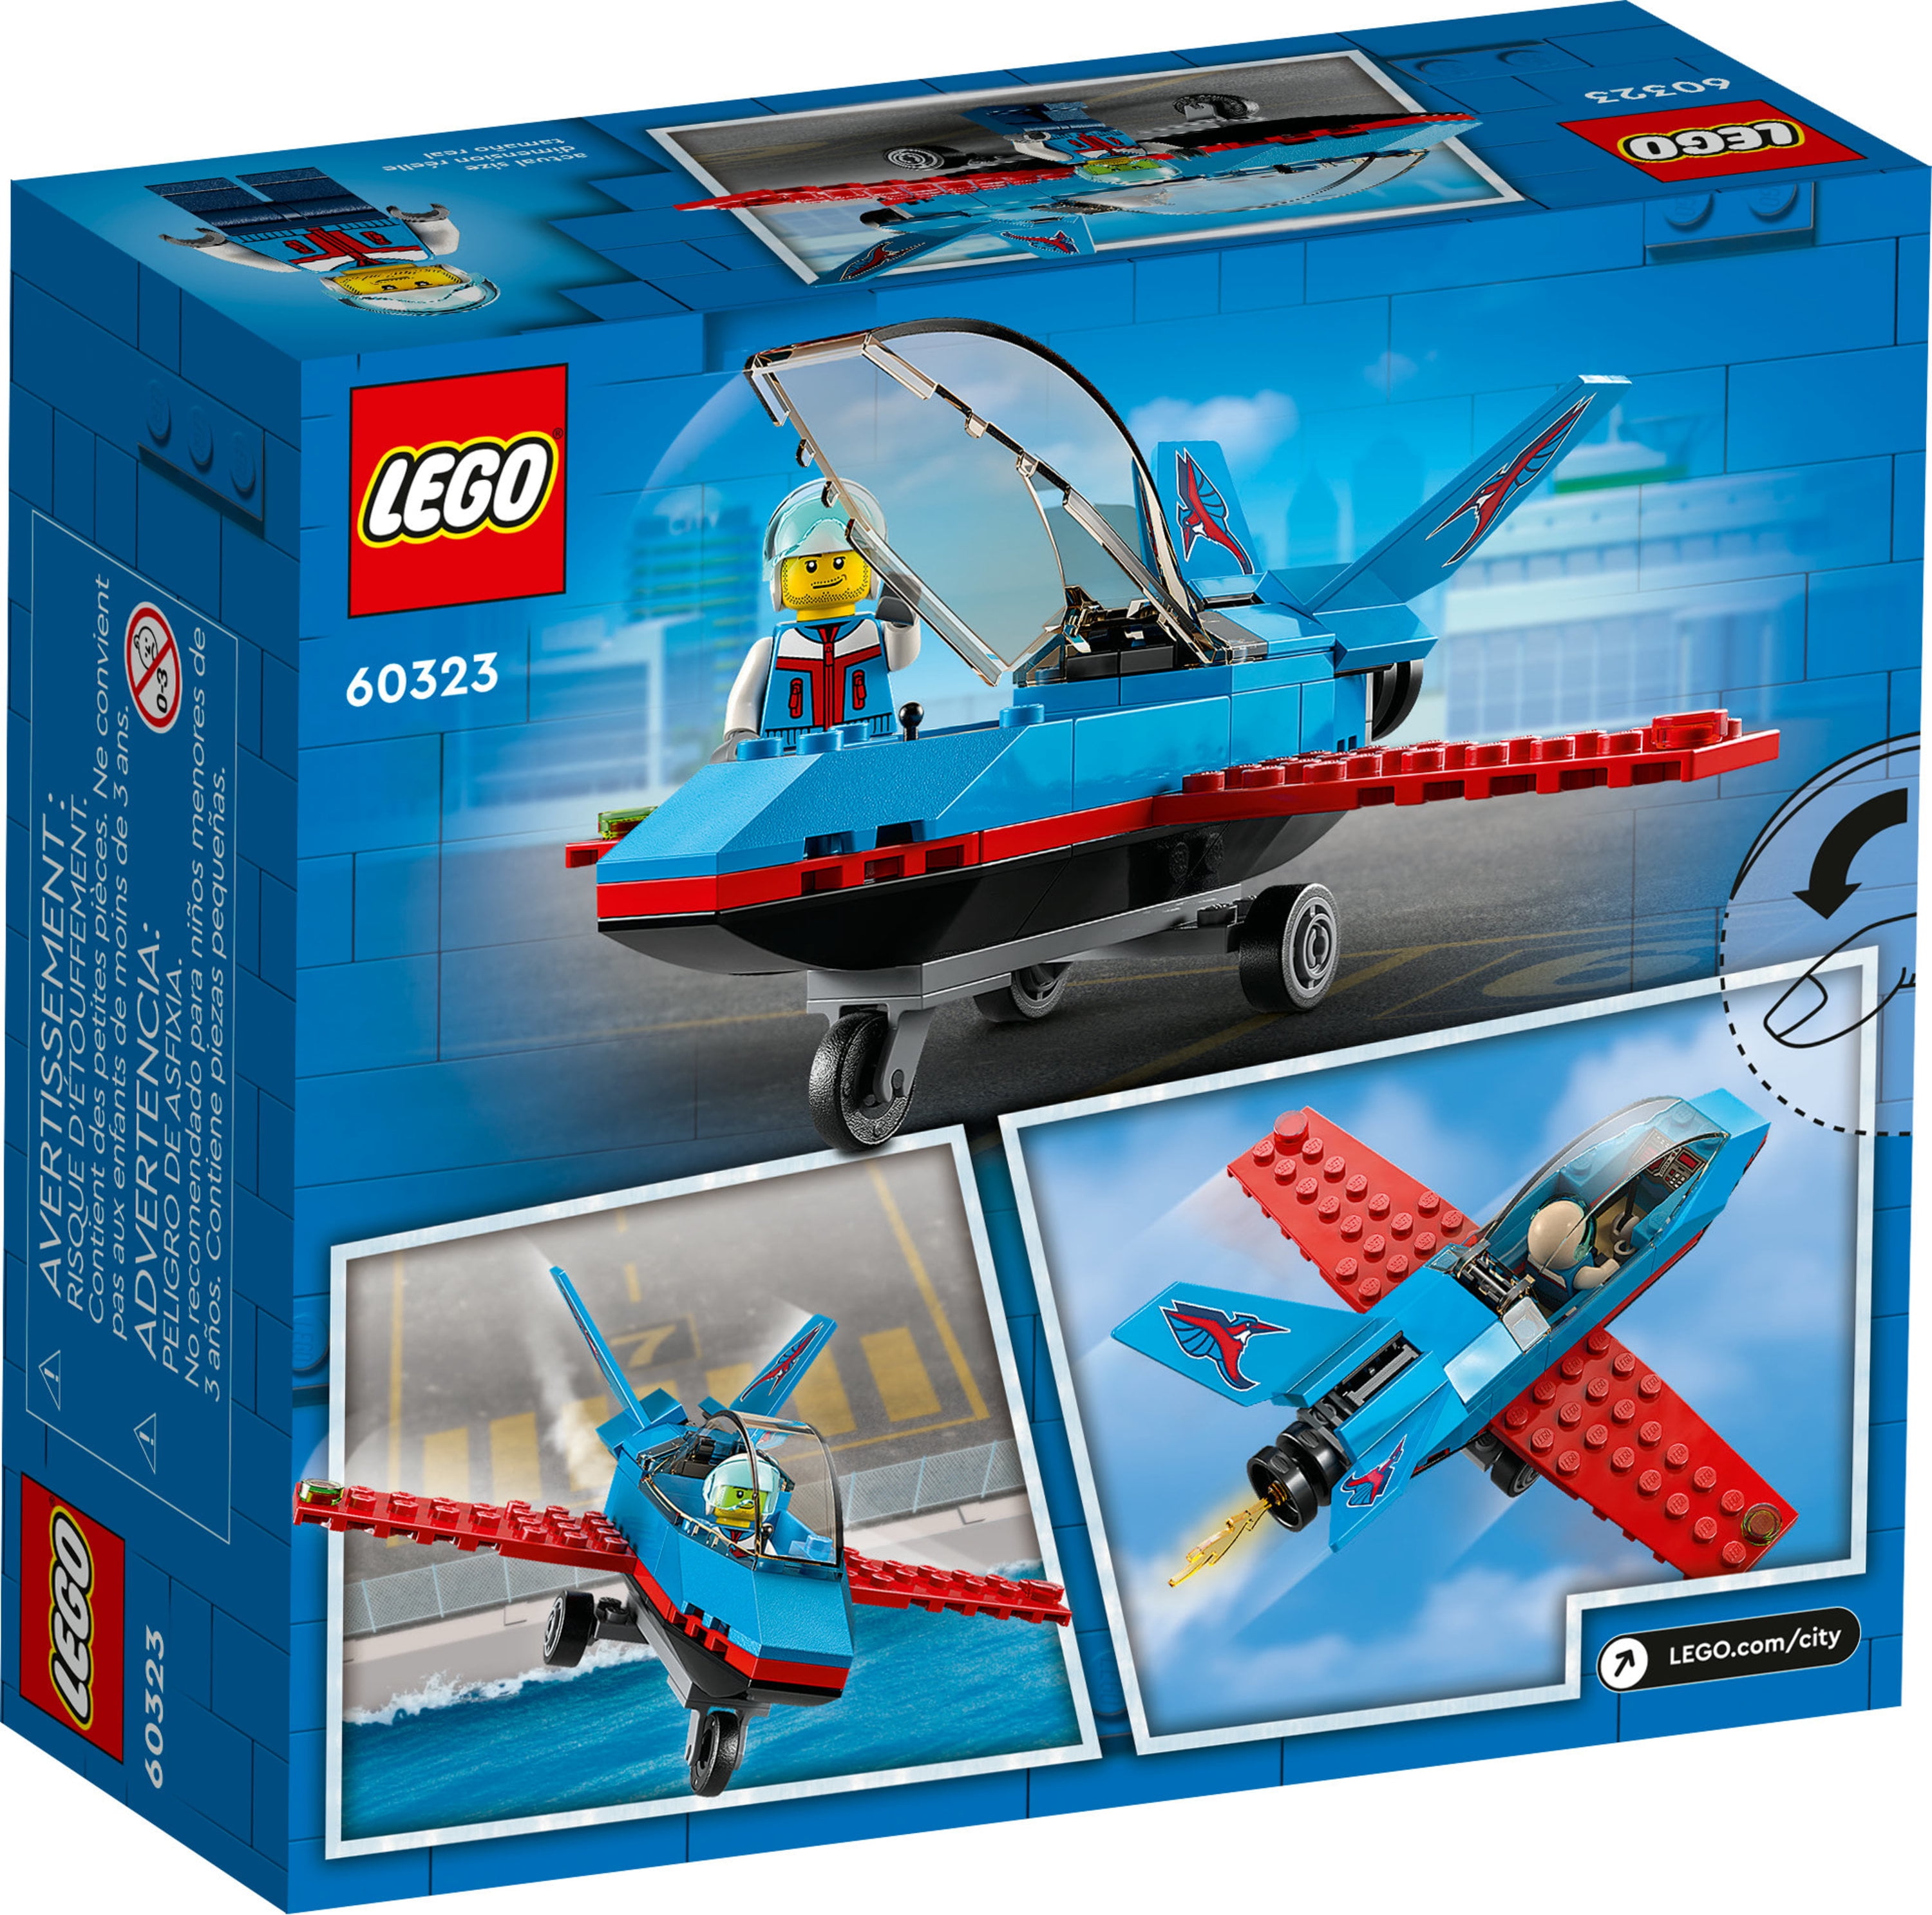 5 Vehicles Gifts with Plane Old Years Stunt Set, Kids, Girls Boys City Building 2022 Jet Minifigure Great 60323 Toy, for LEGO plus Pilot and Airplane